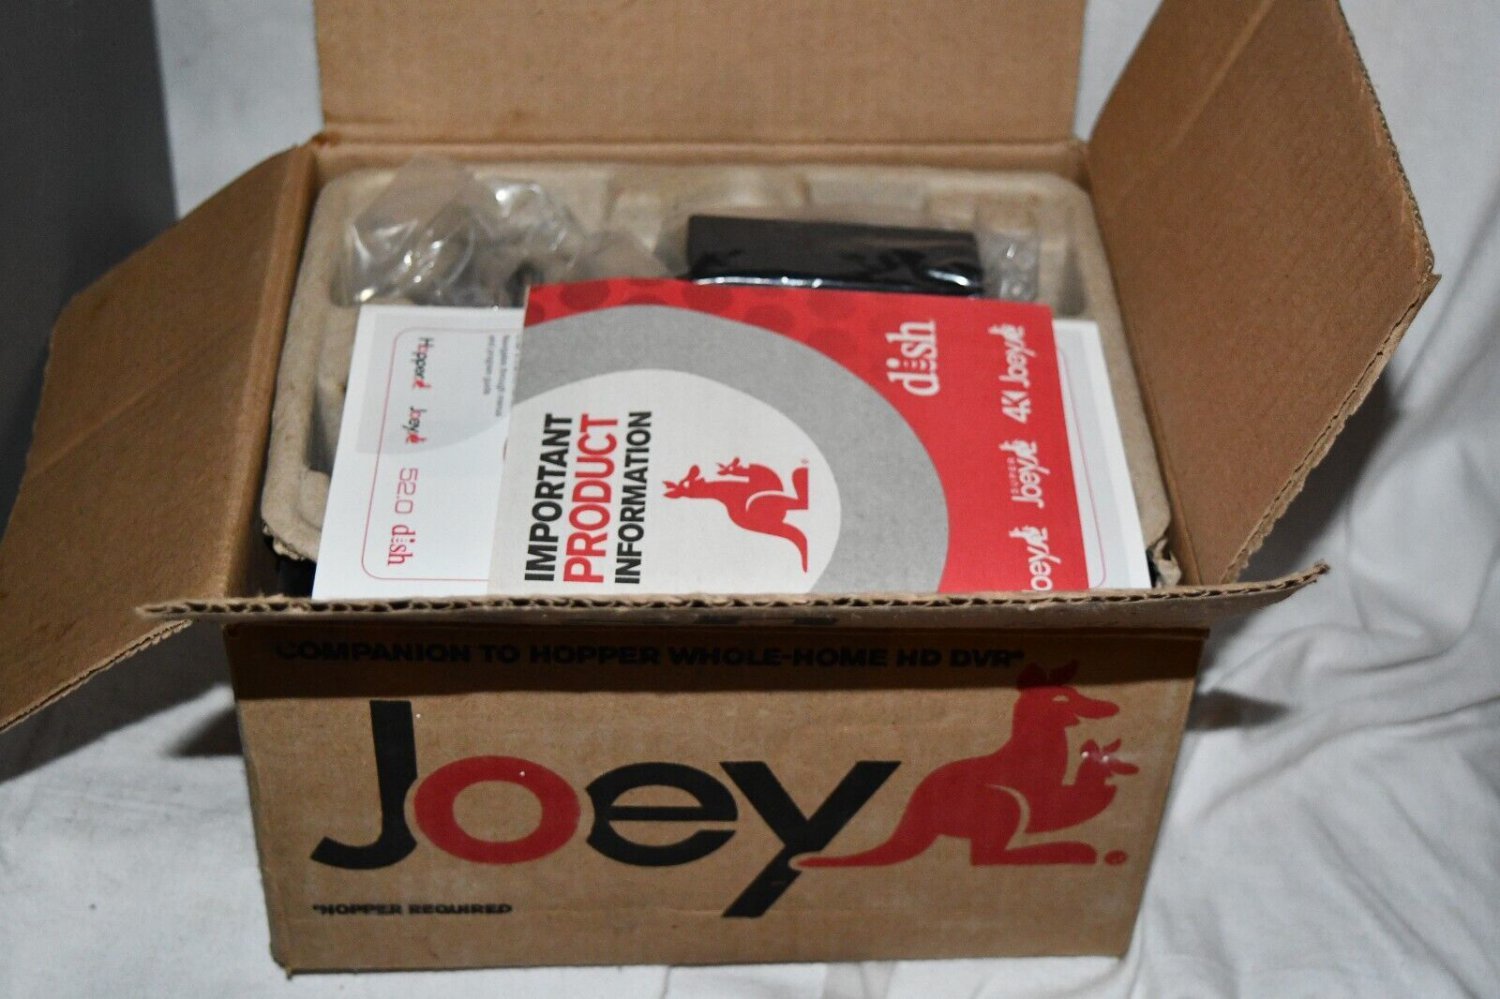 DISH Network Satellite Receiver JOEY2 207186 NEW complete #1 515b2